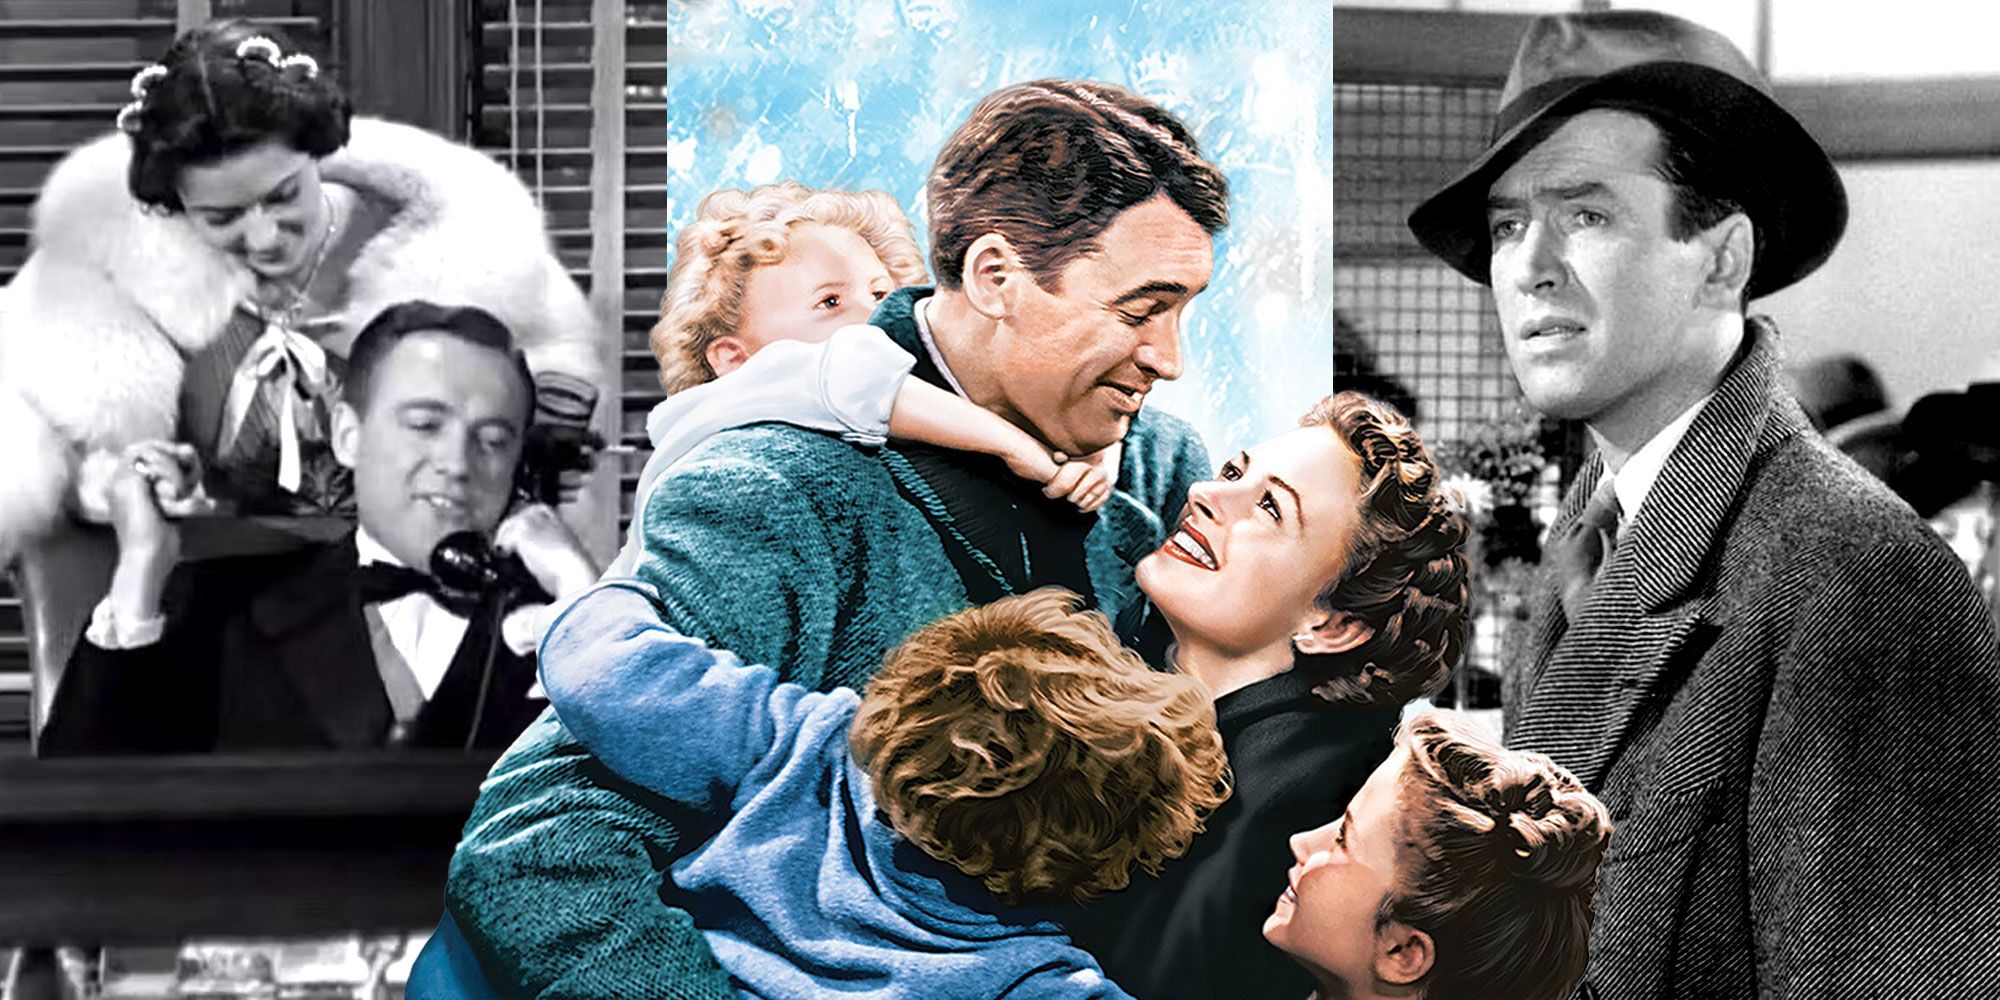 Collage of scenes from It's a Wonderful Life